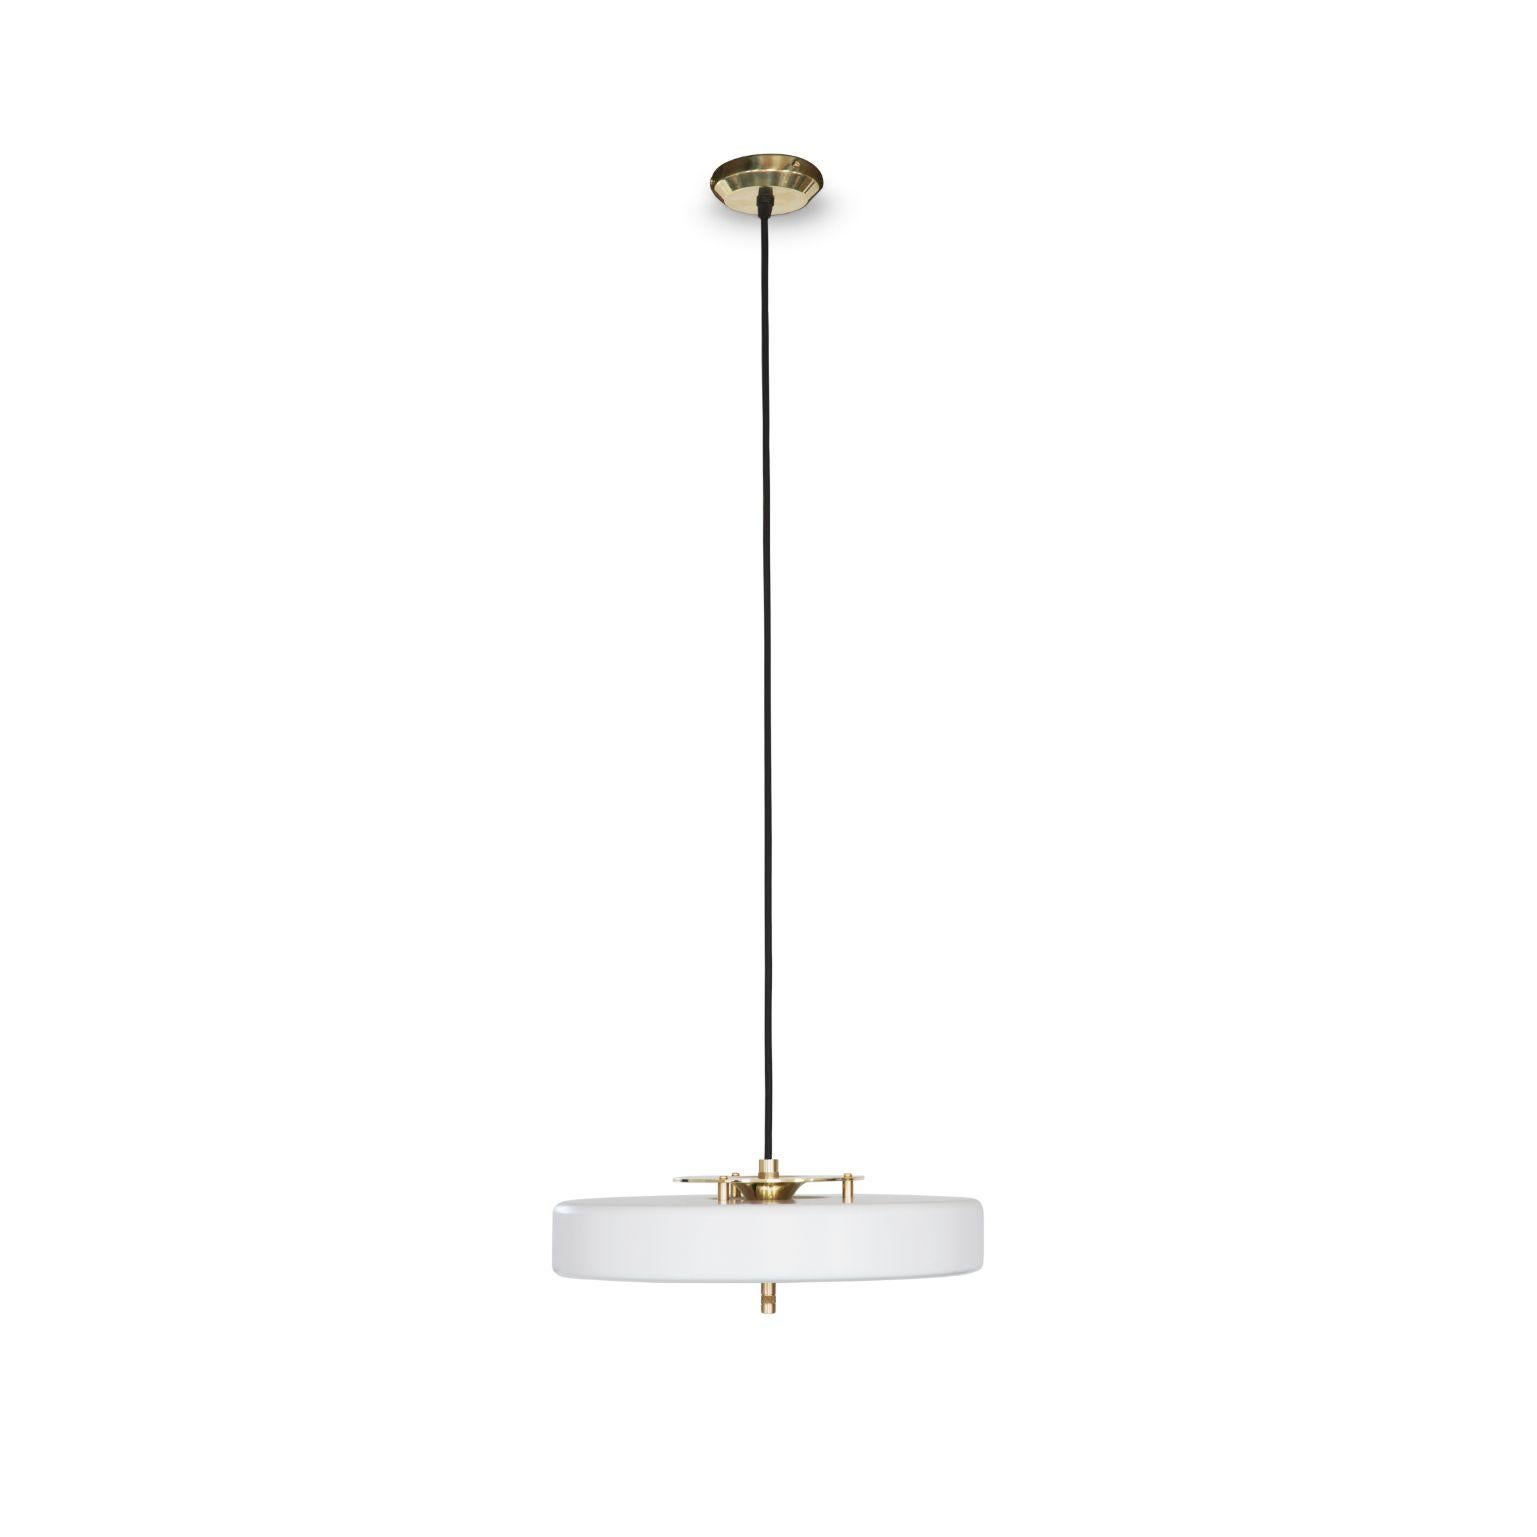 Revolve pendant light - Polished brass - White by Bert Frank
Dimensions: 60-200 x 35 x 11 cm
Materials: Brass, steel

  

When Adam Yeats and Robbie Llewellyn founded Bert Frank in 2013 it was a meeting of minds and the start of a collaborative